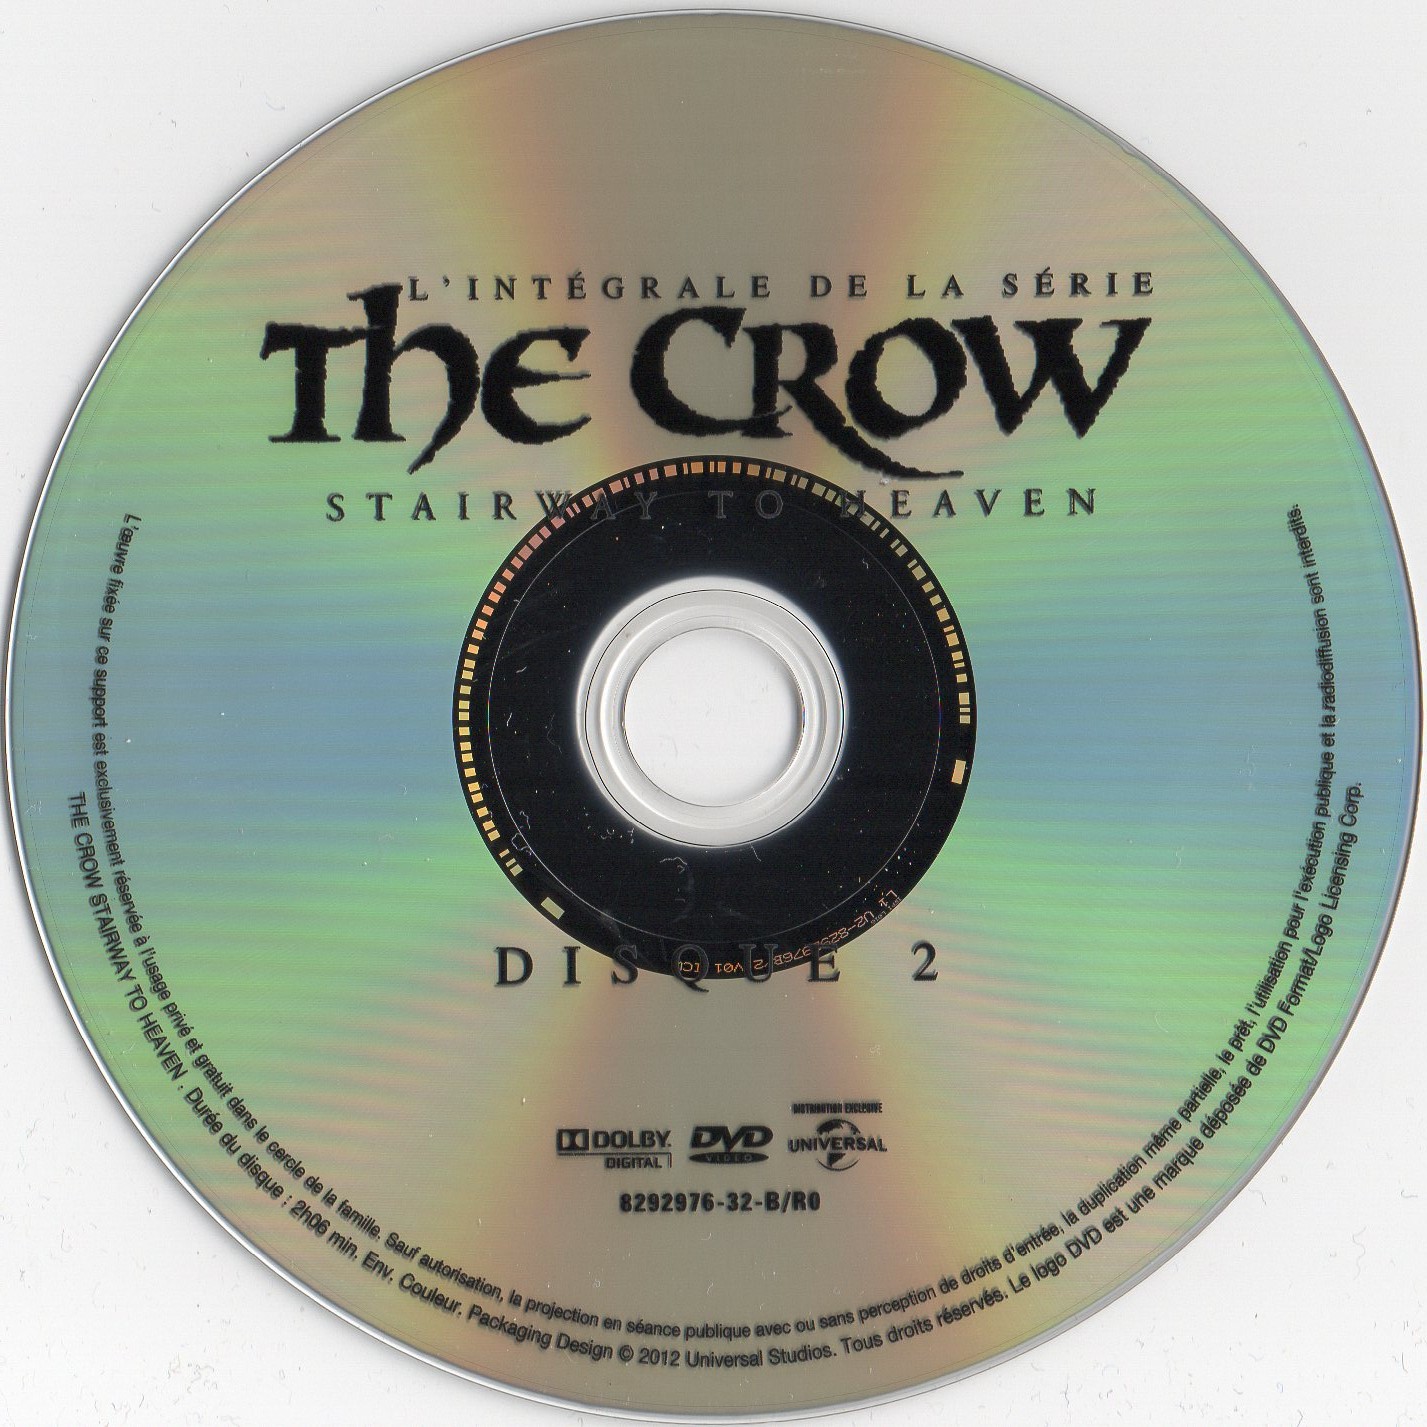 The crow stairway to heaven DISC 2